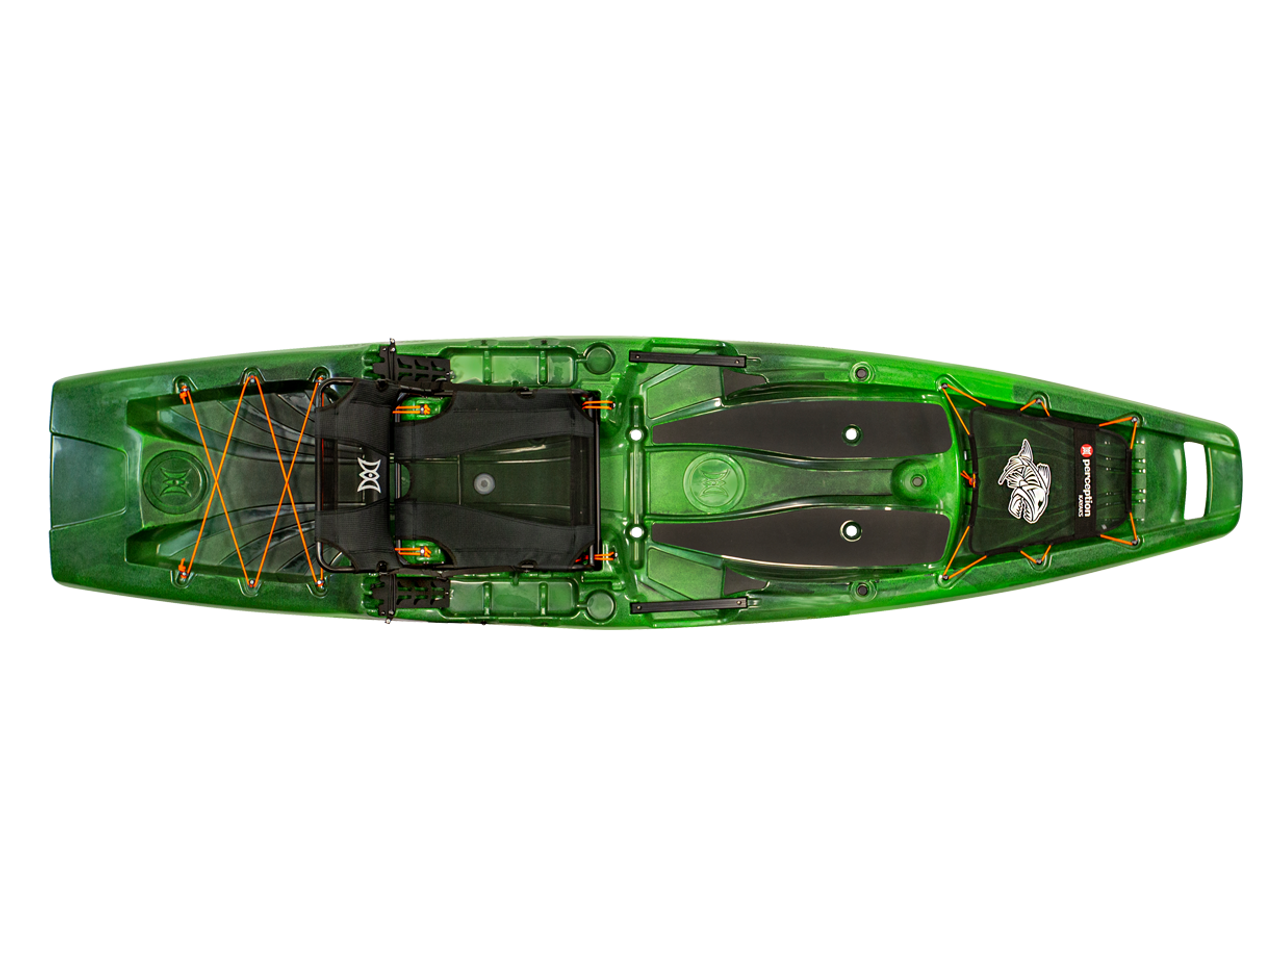 Outlaw 11.5 Fishing kayak from Perception Kayaks - Transducer Scupper and  Roomy stern